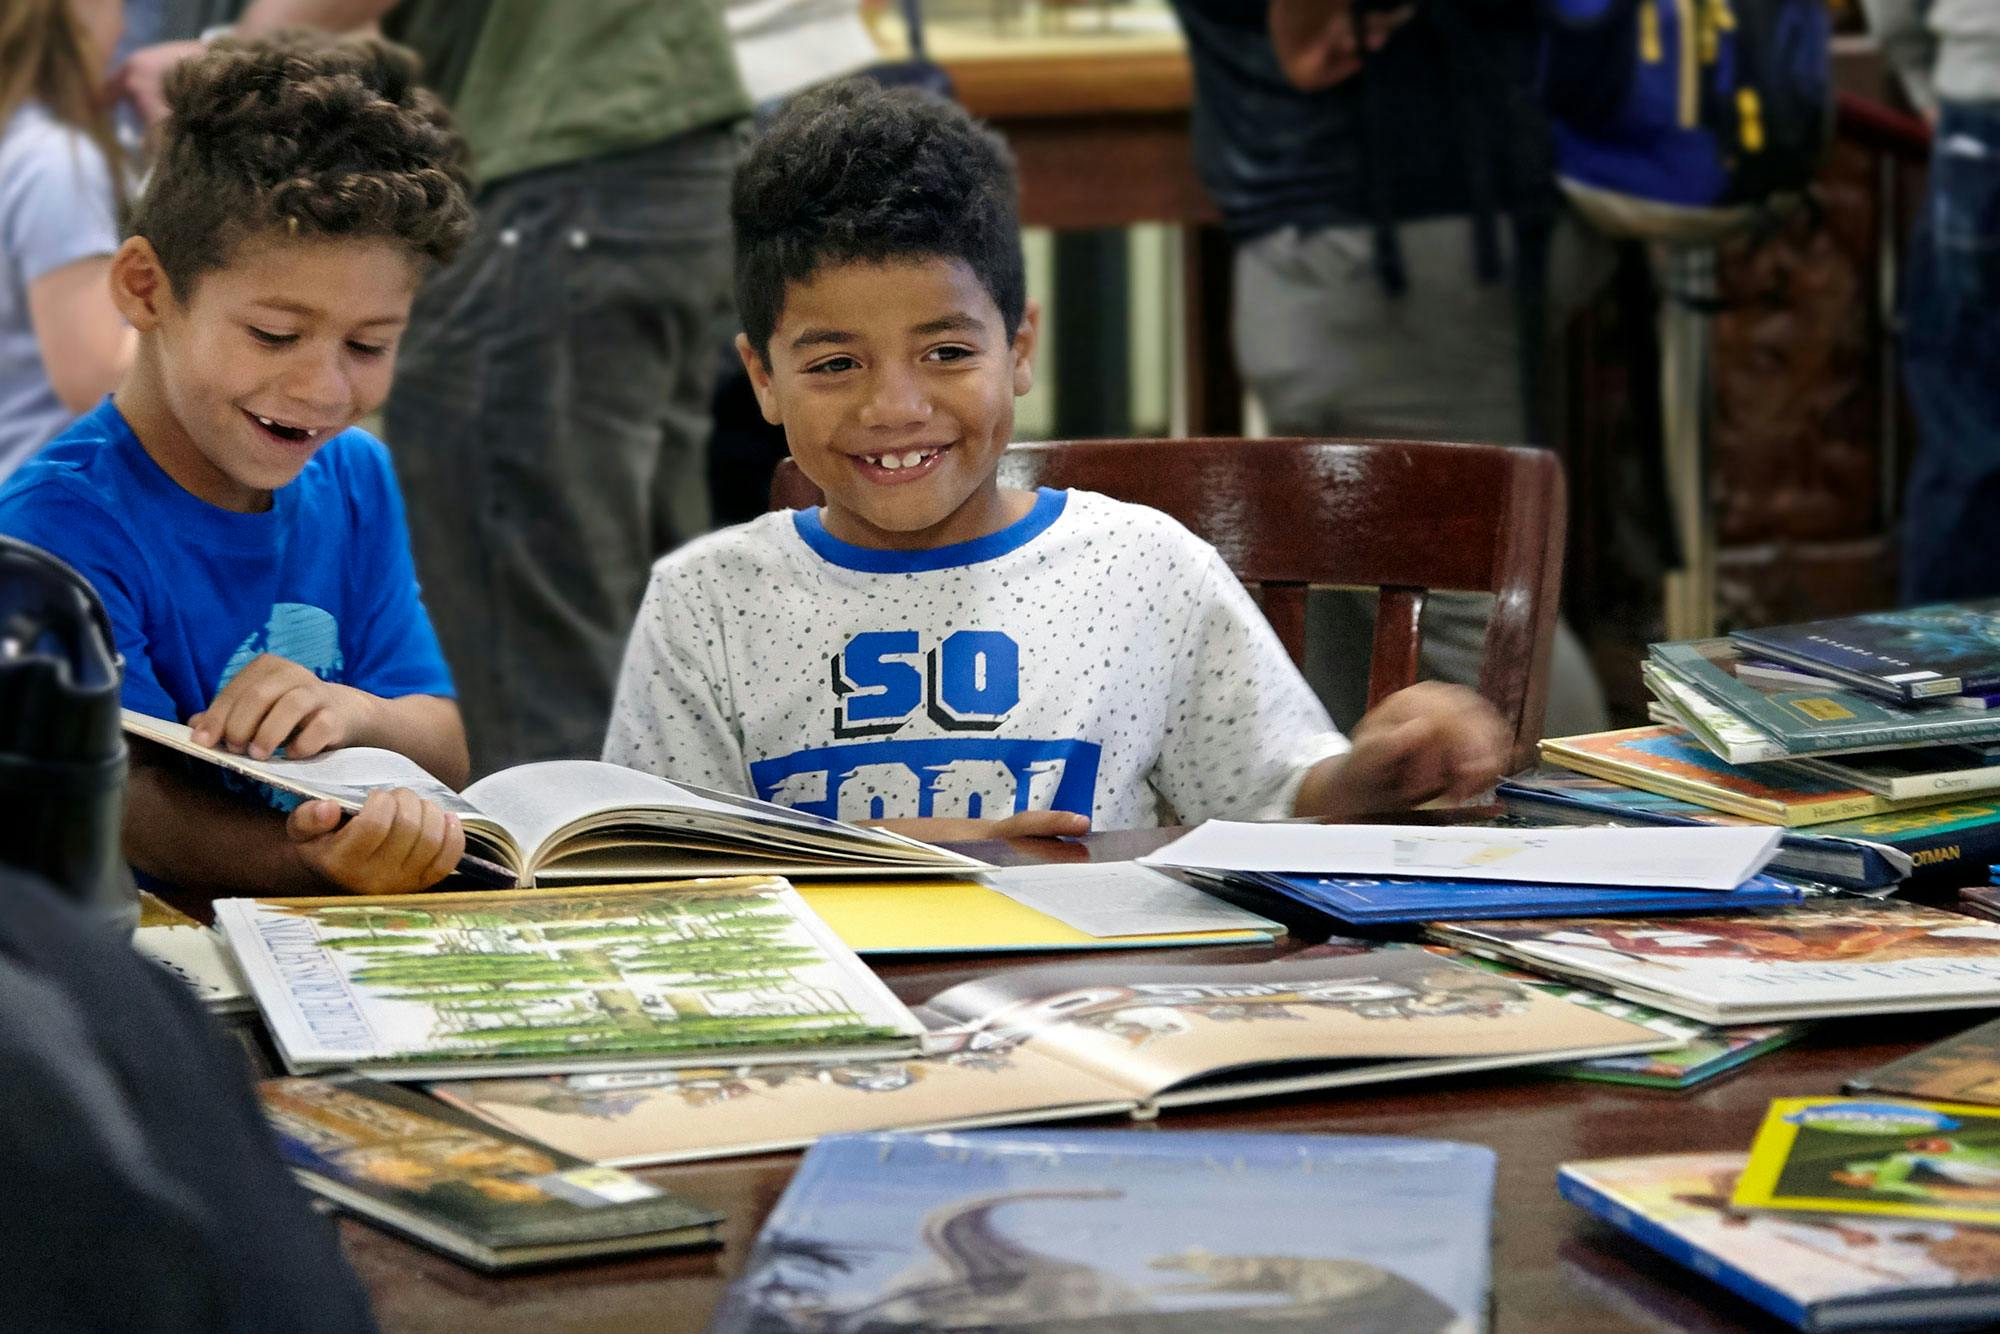 Two children seated at a table look at picture books.